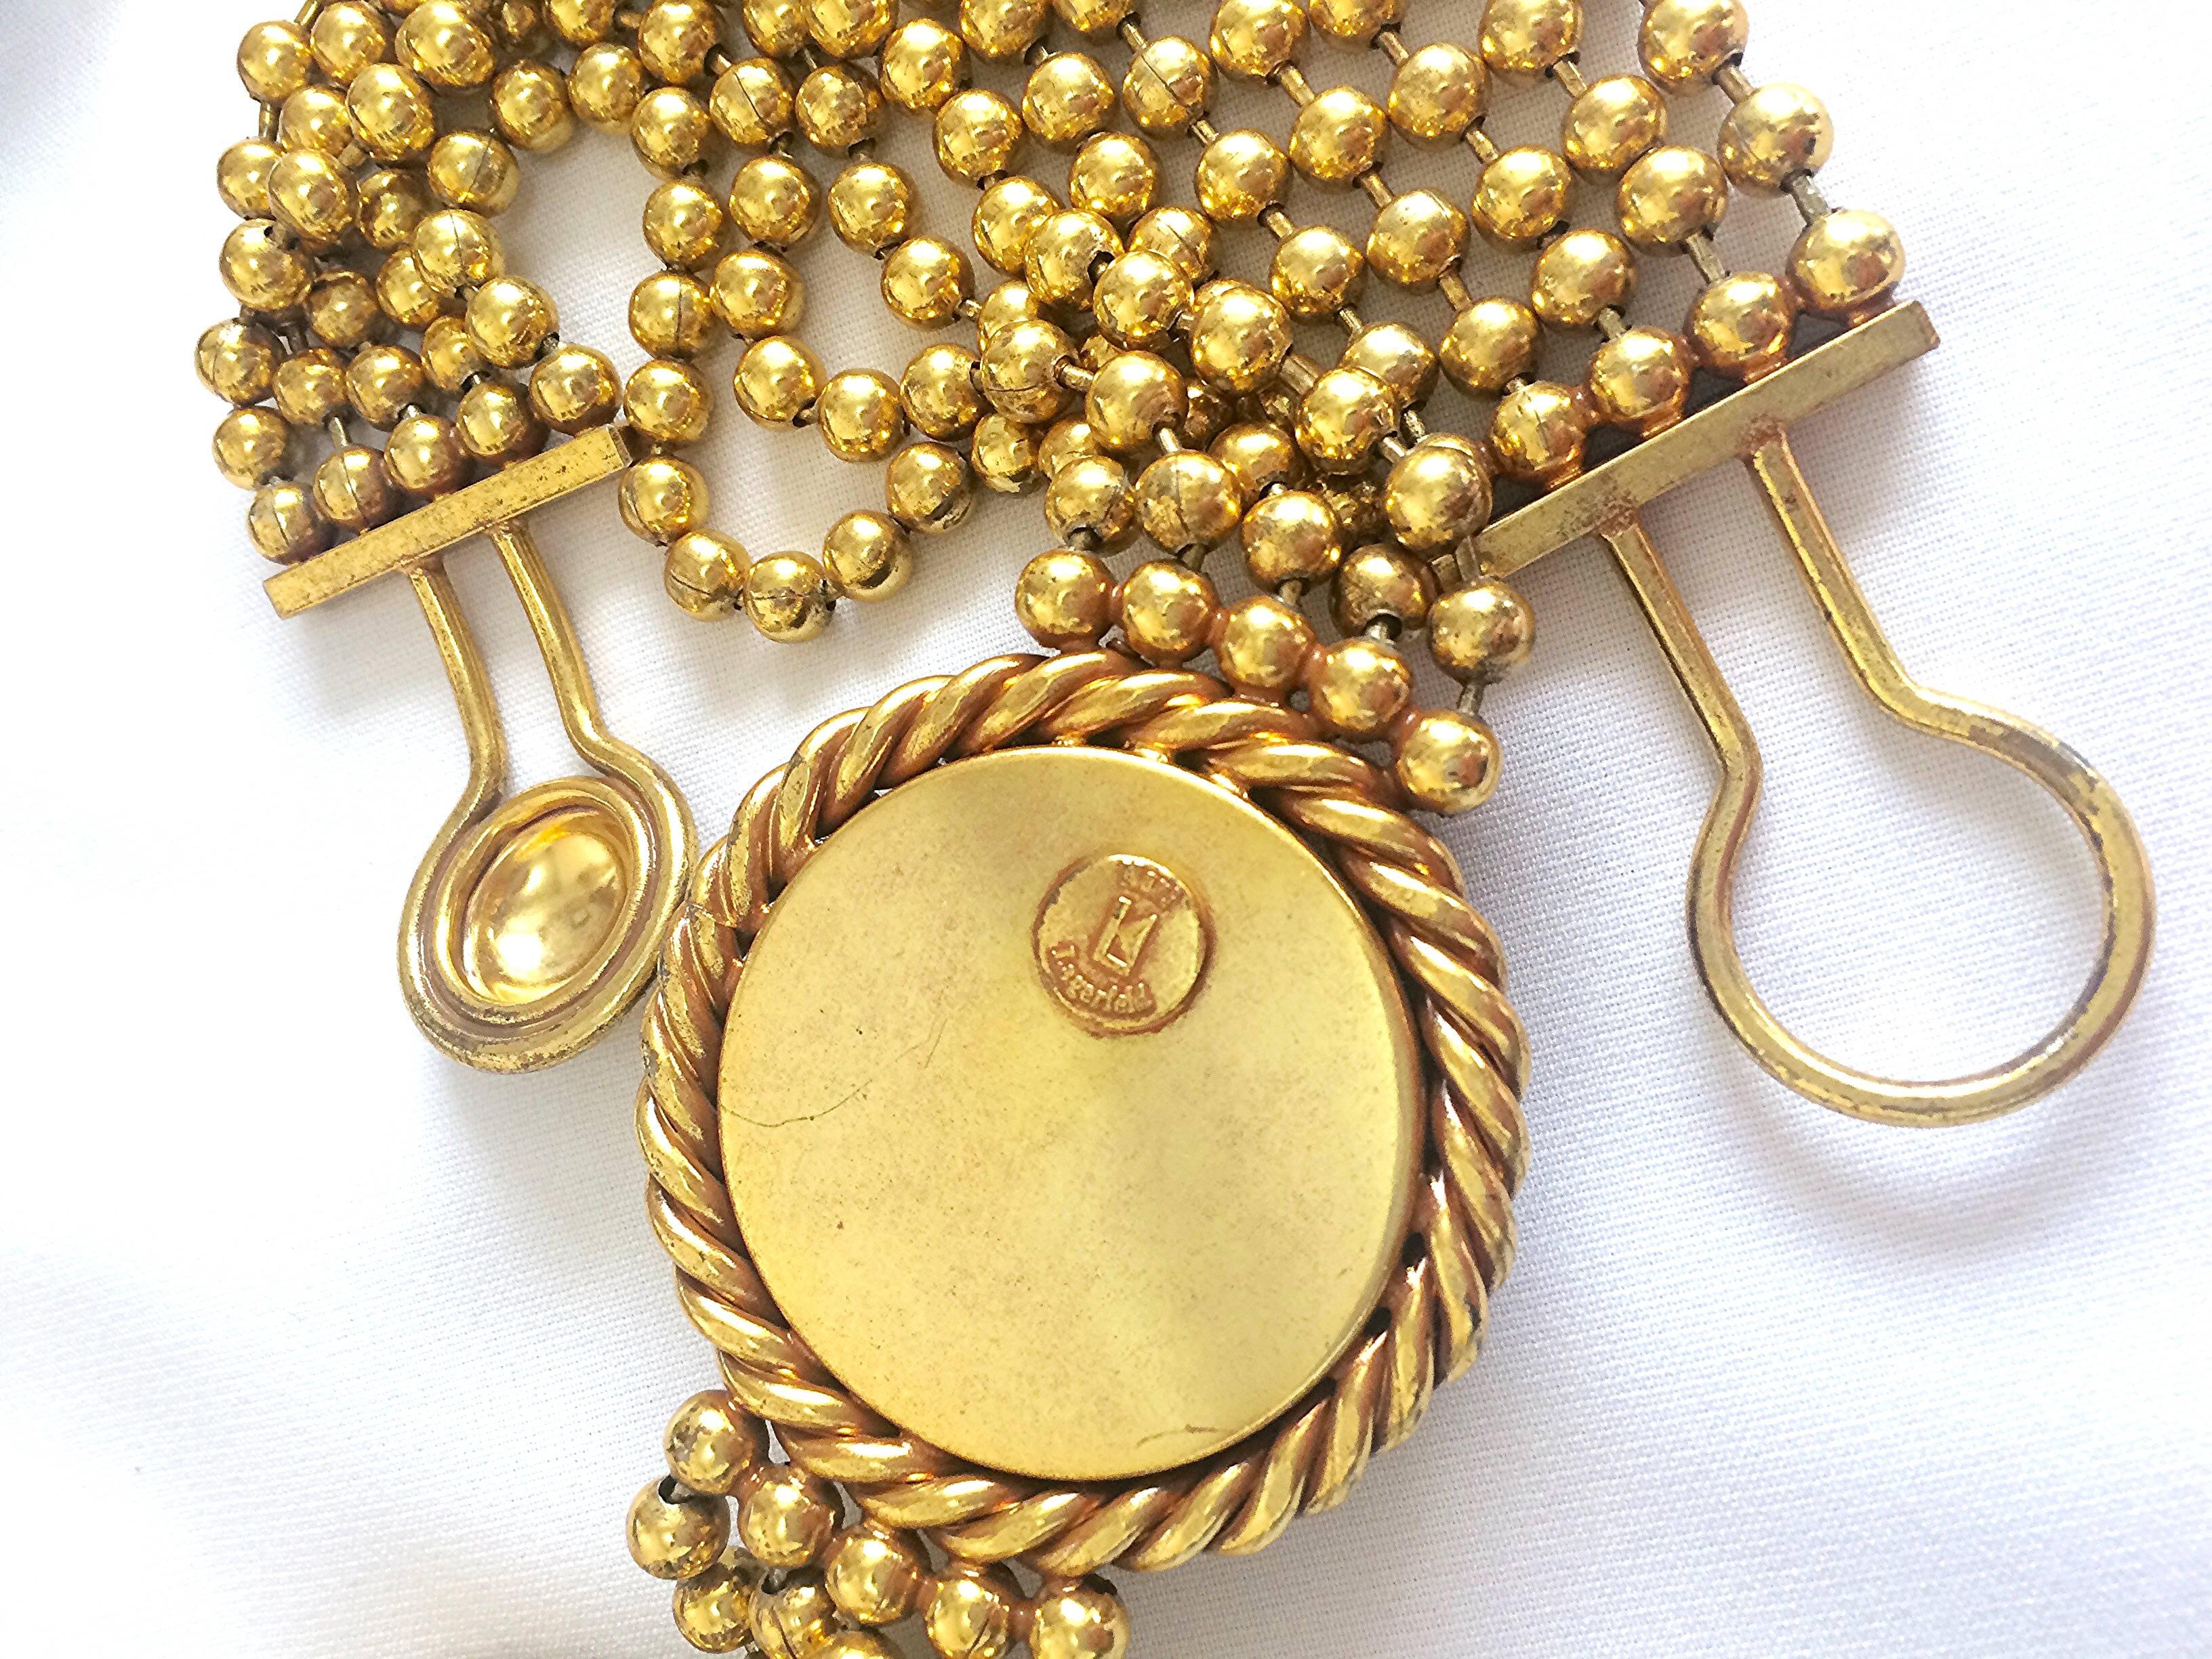 Vintage Karl Lagerfeld golden ball chain belt, necklace with extra large motifs. 3